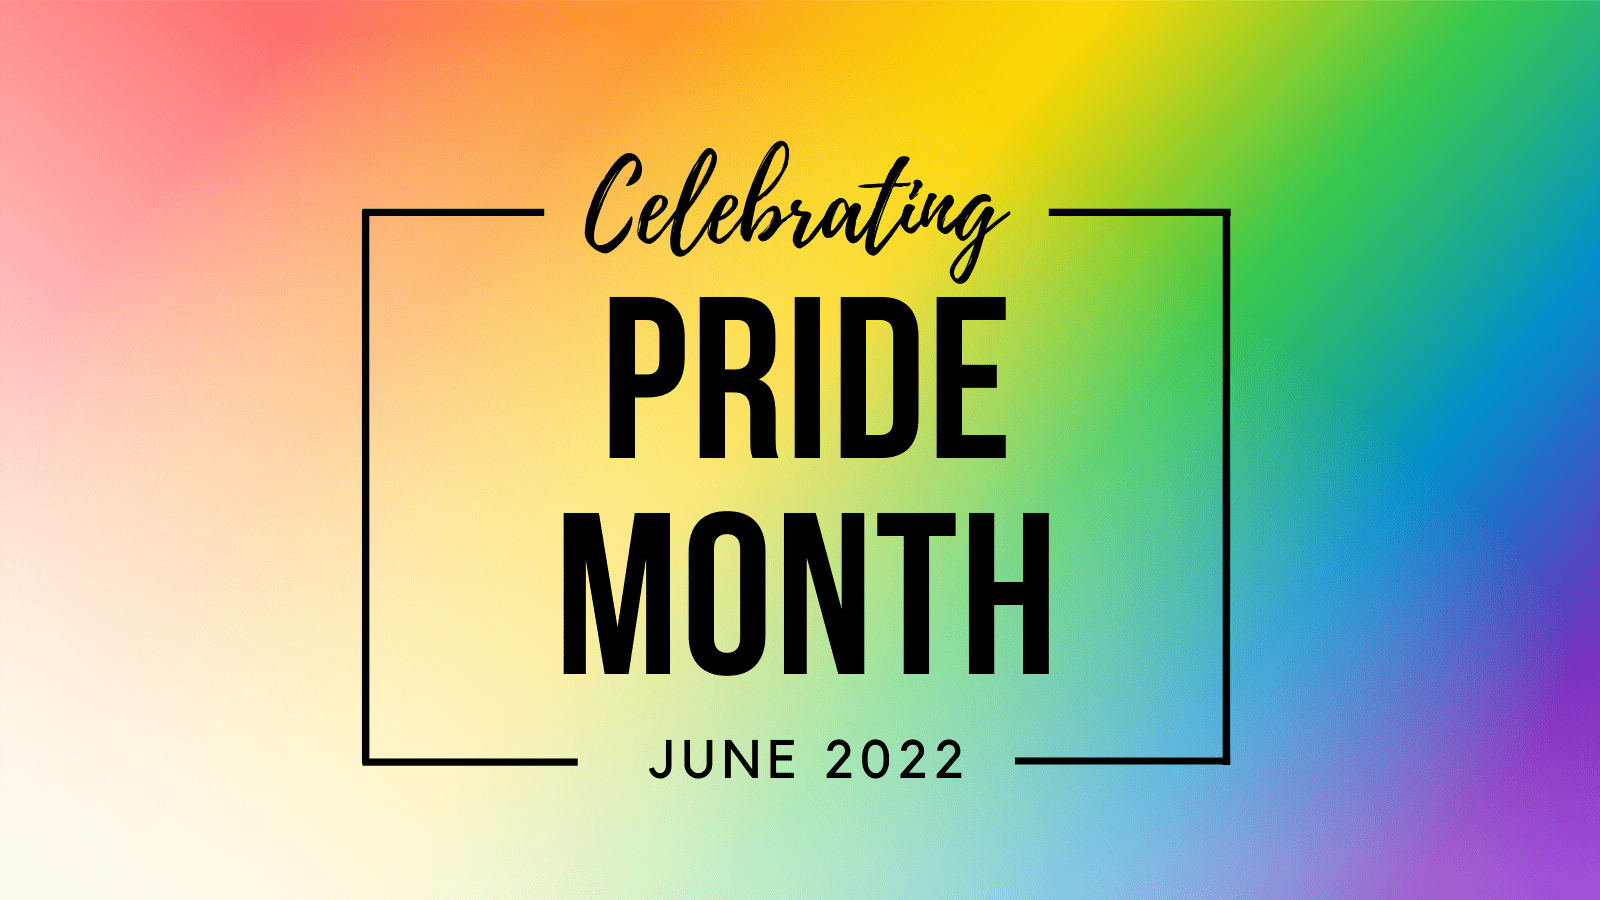 text that reads "Celebrating Pride Month, June 2022" with a rainbow background